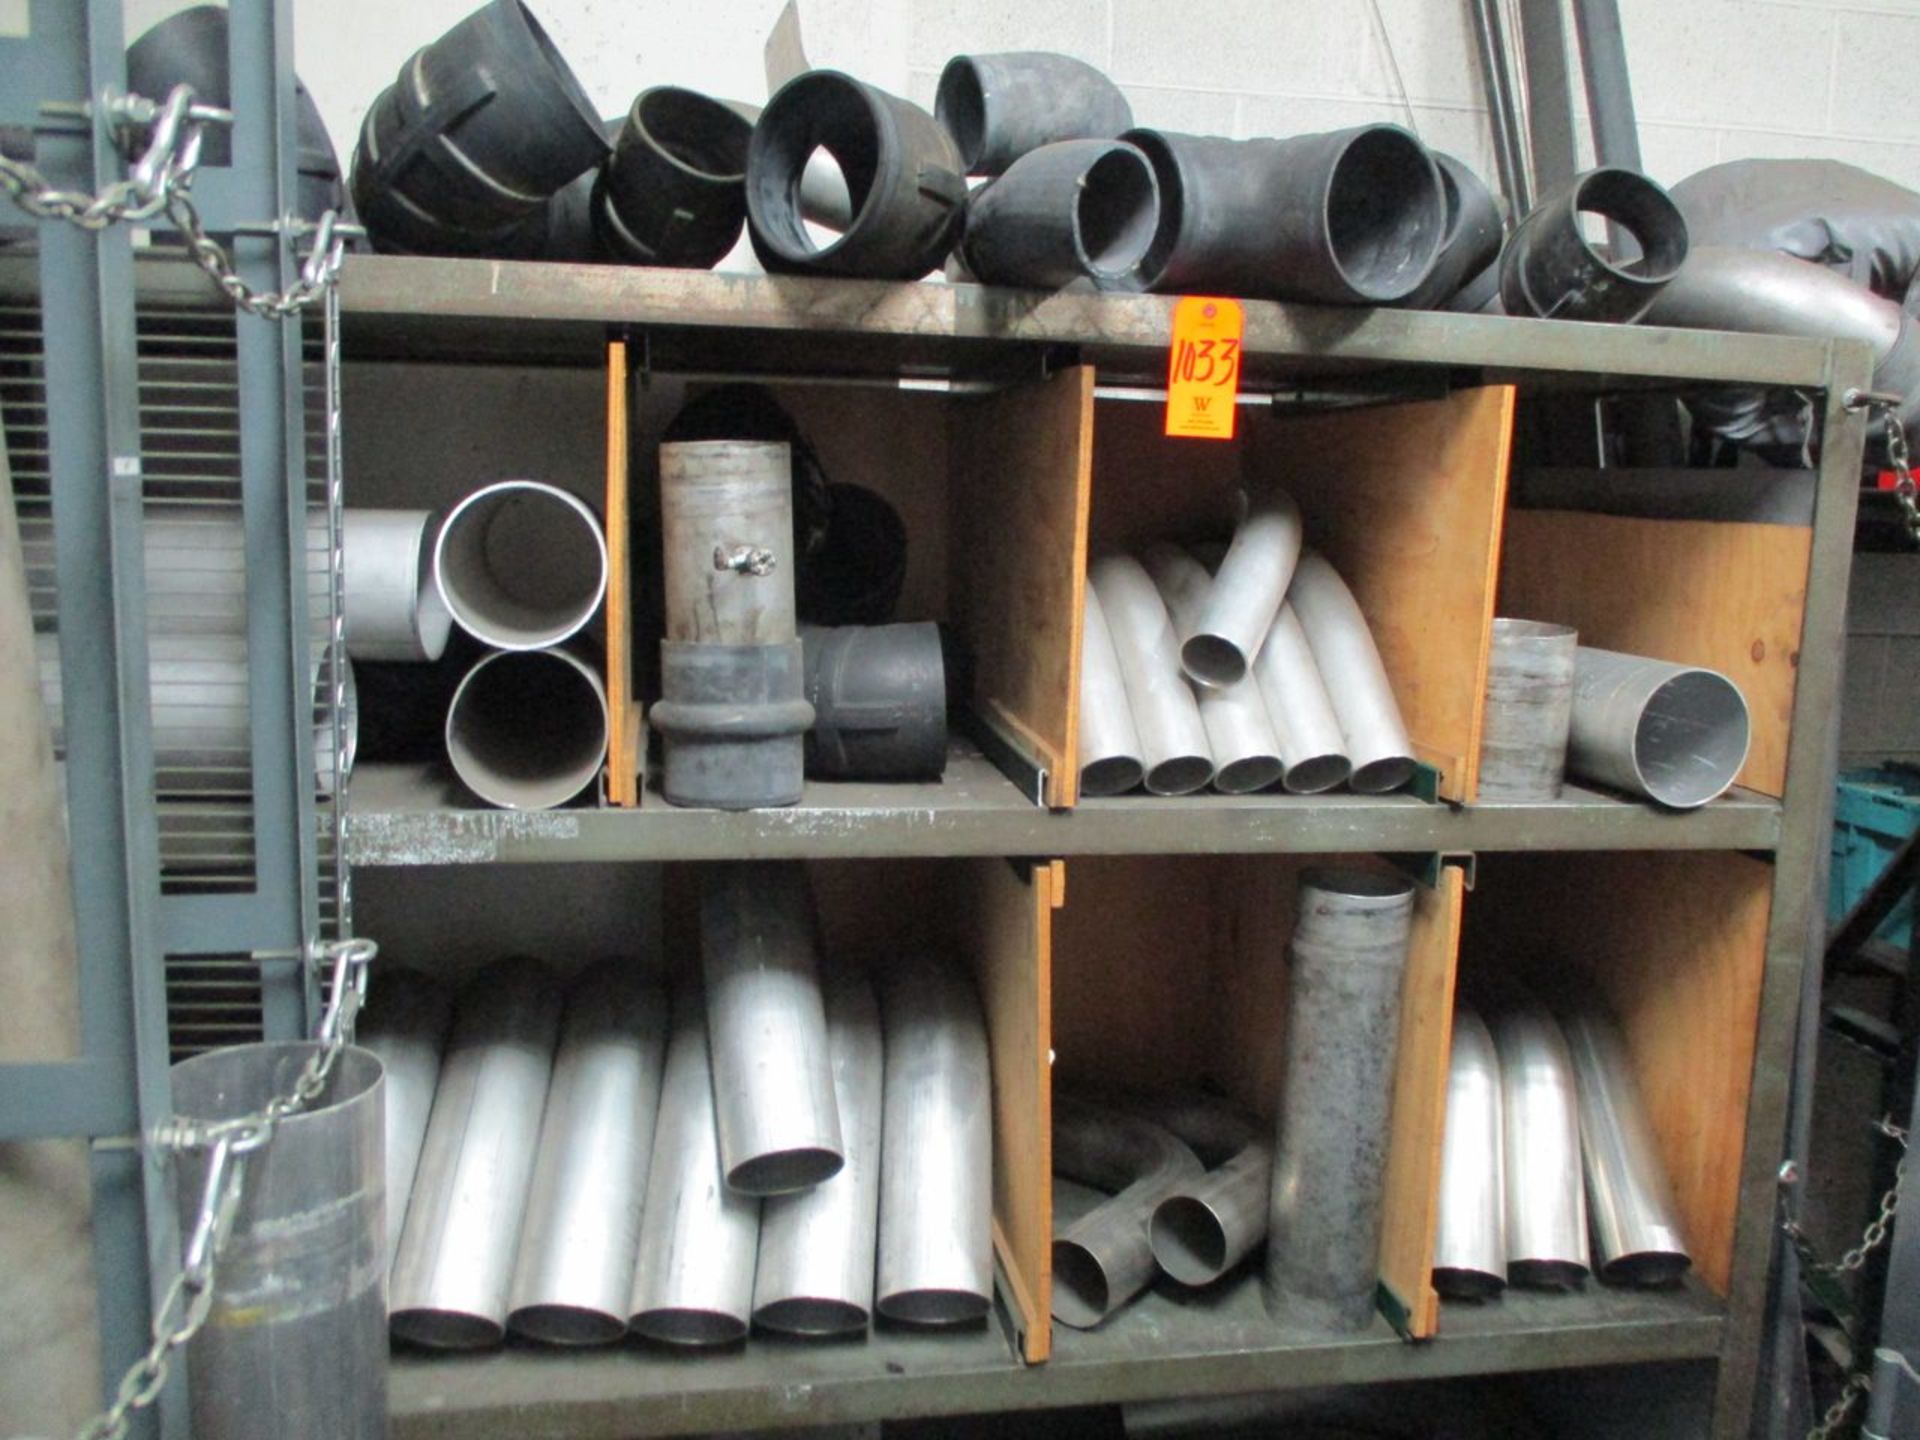 (2) Sections of Steel Shelving, Wire and Chrome Rack with Pipe Fittings (Building 9 Area 3 - Pipe